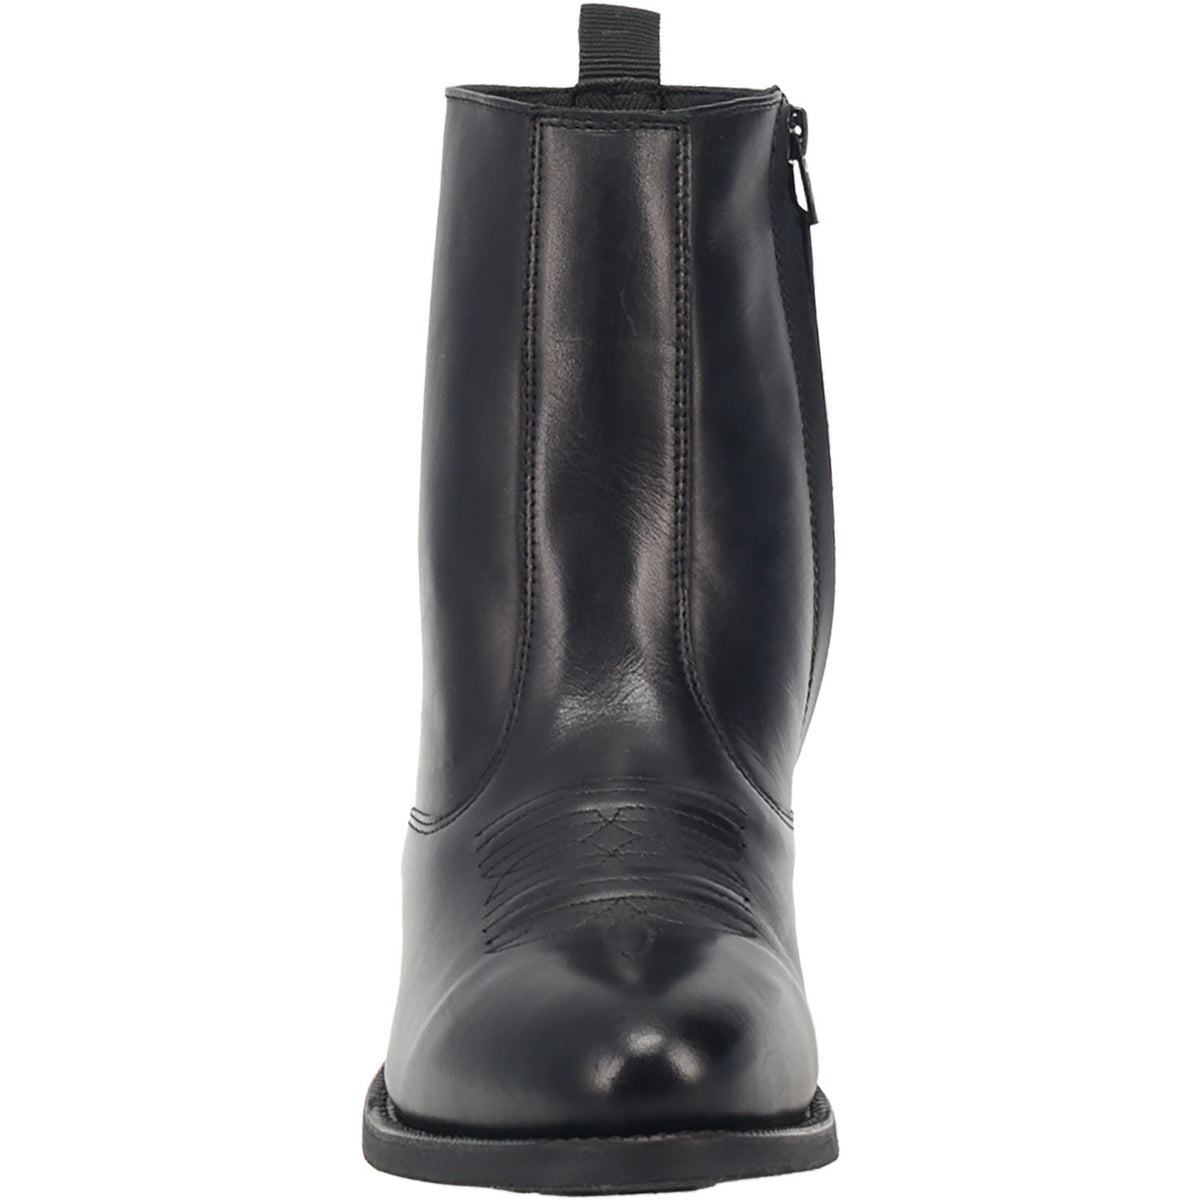 FLETCHER LEATHER BOOT Cover